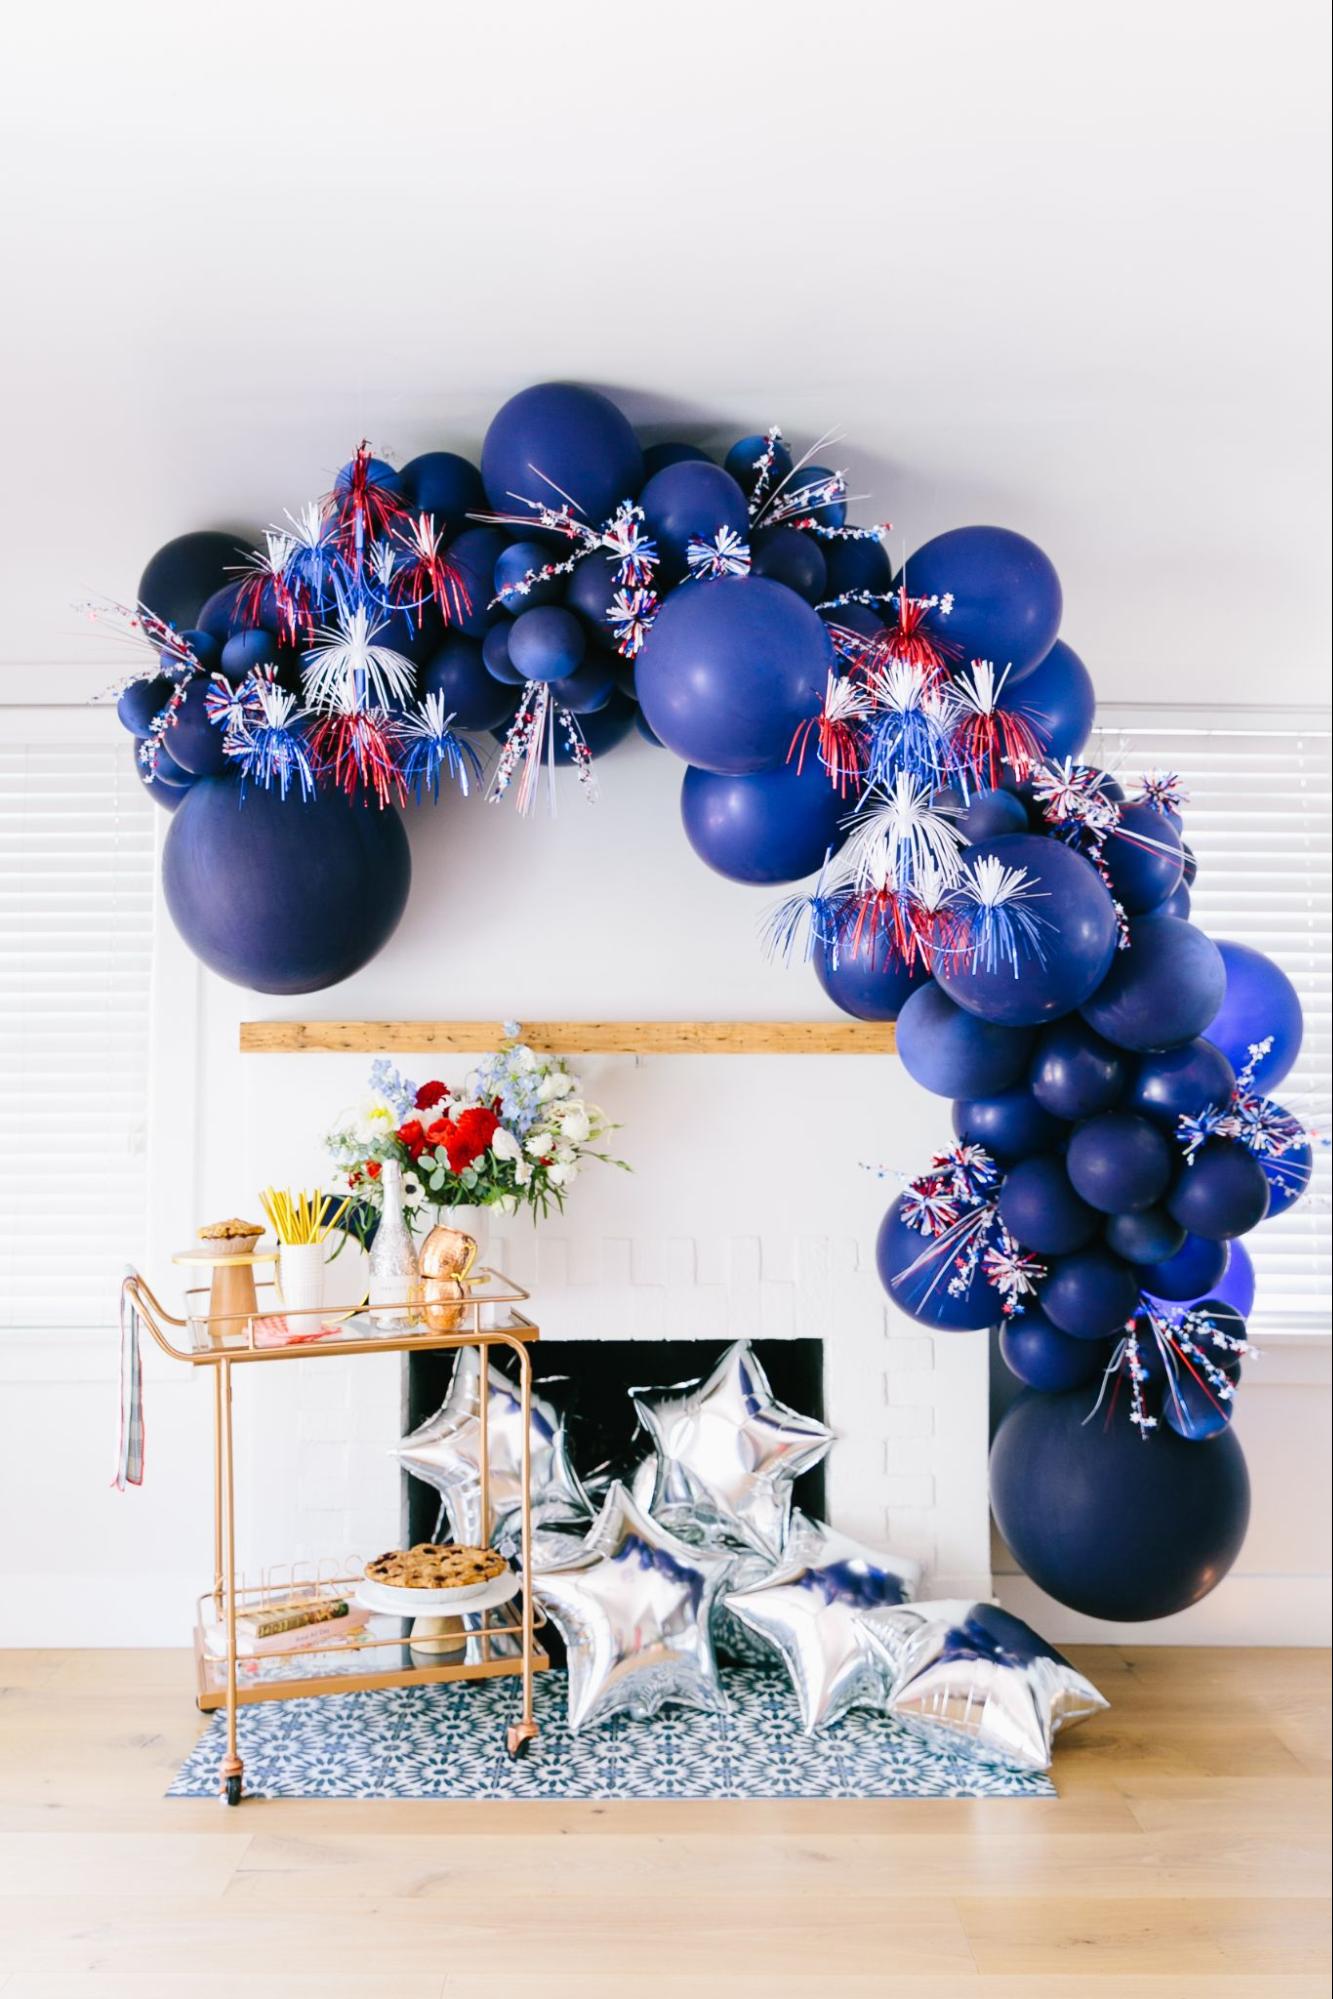 New Years Party Decoration Ideas - The Frugal Navy Wife